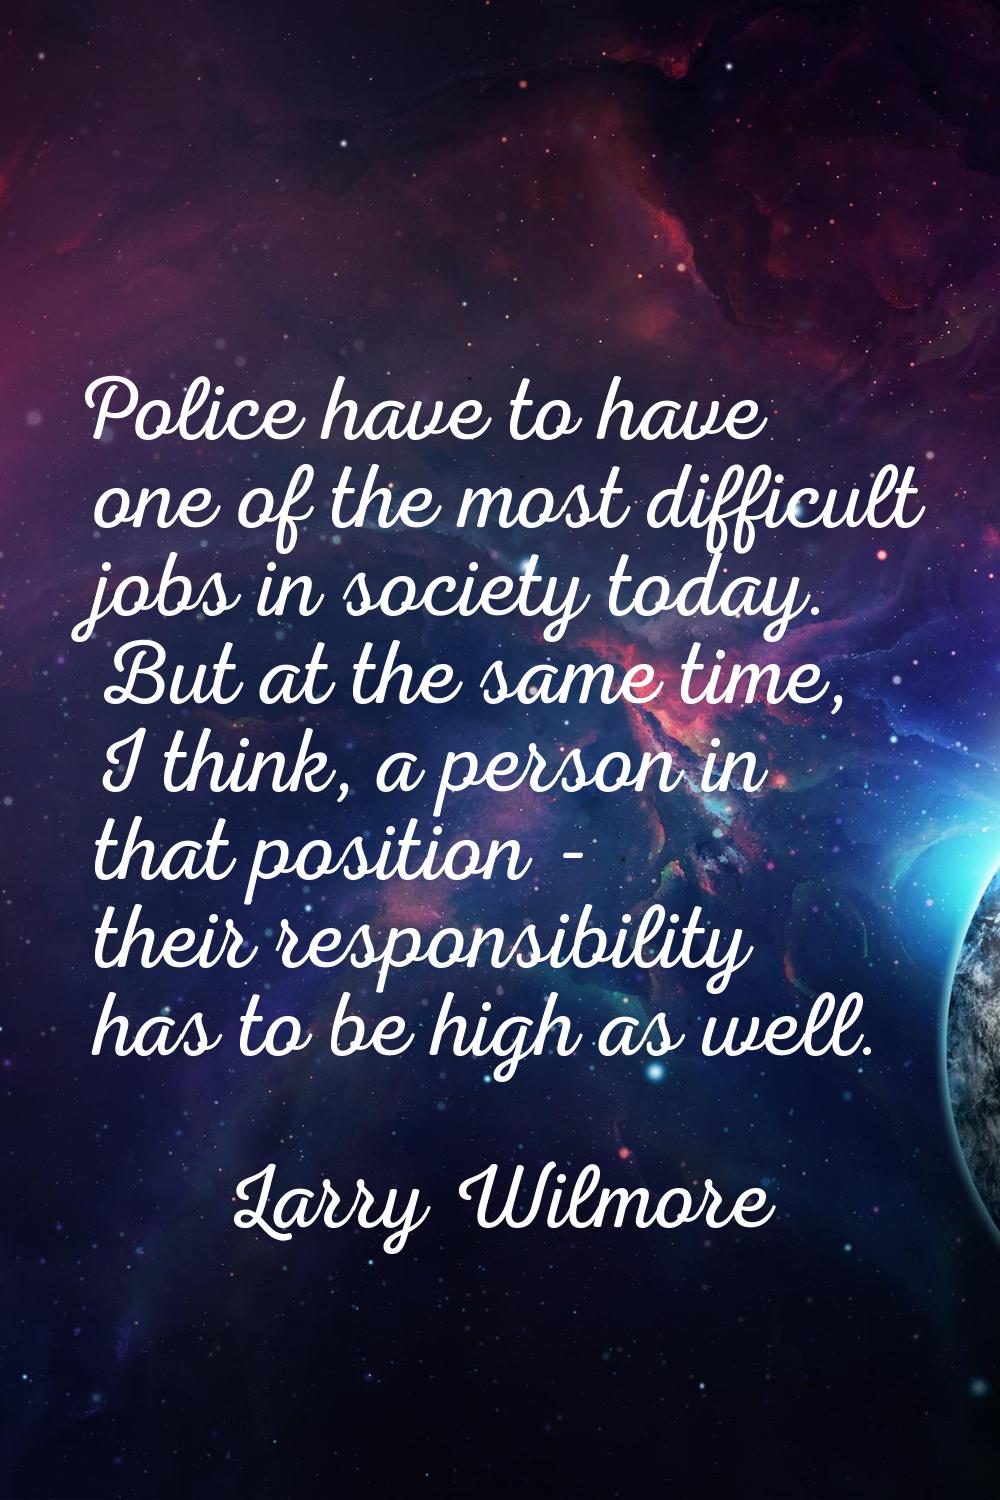 Police have to have one of the most difficult jobs in society today. But at the same time, I think,